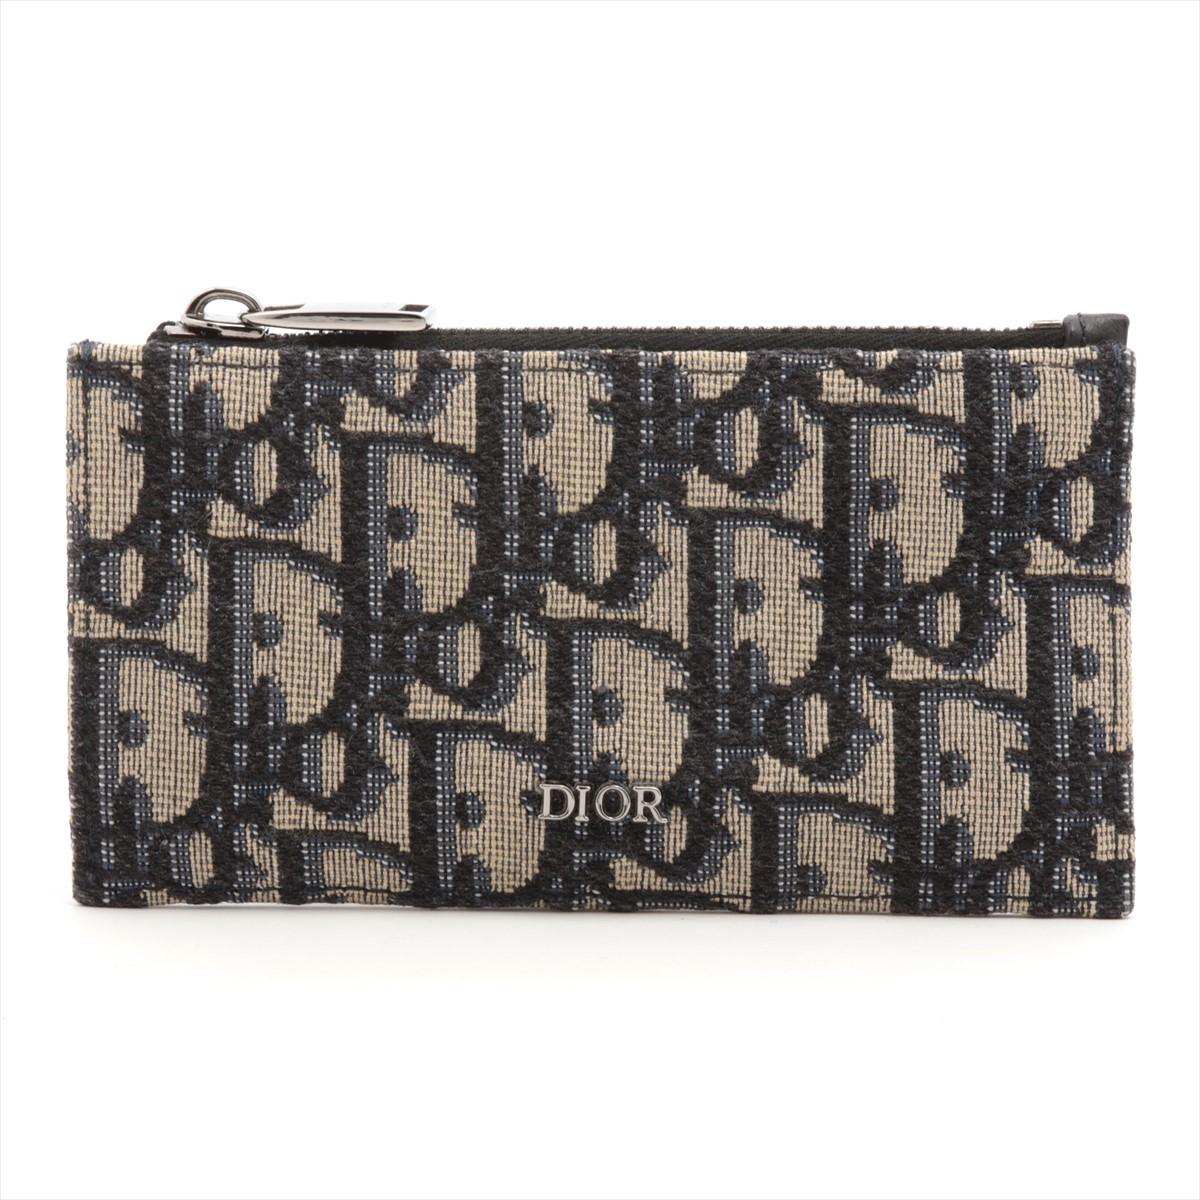 The Dior Oblique Zipped Card Holder in Black x Navy is a sleek and sophisticated accessory that combines style with practicality. Crafted from high-quality canvas adorned with the iconic Dior Oblique pattern, the card holder exudes luxury and